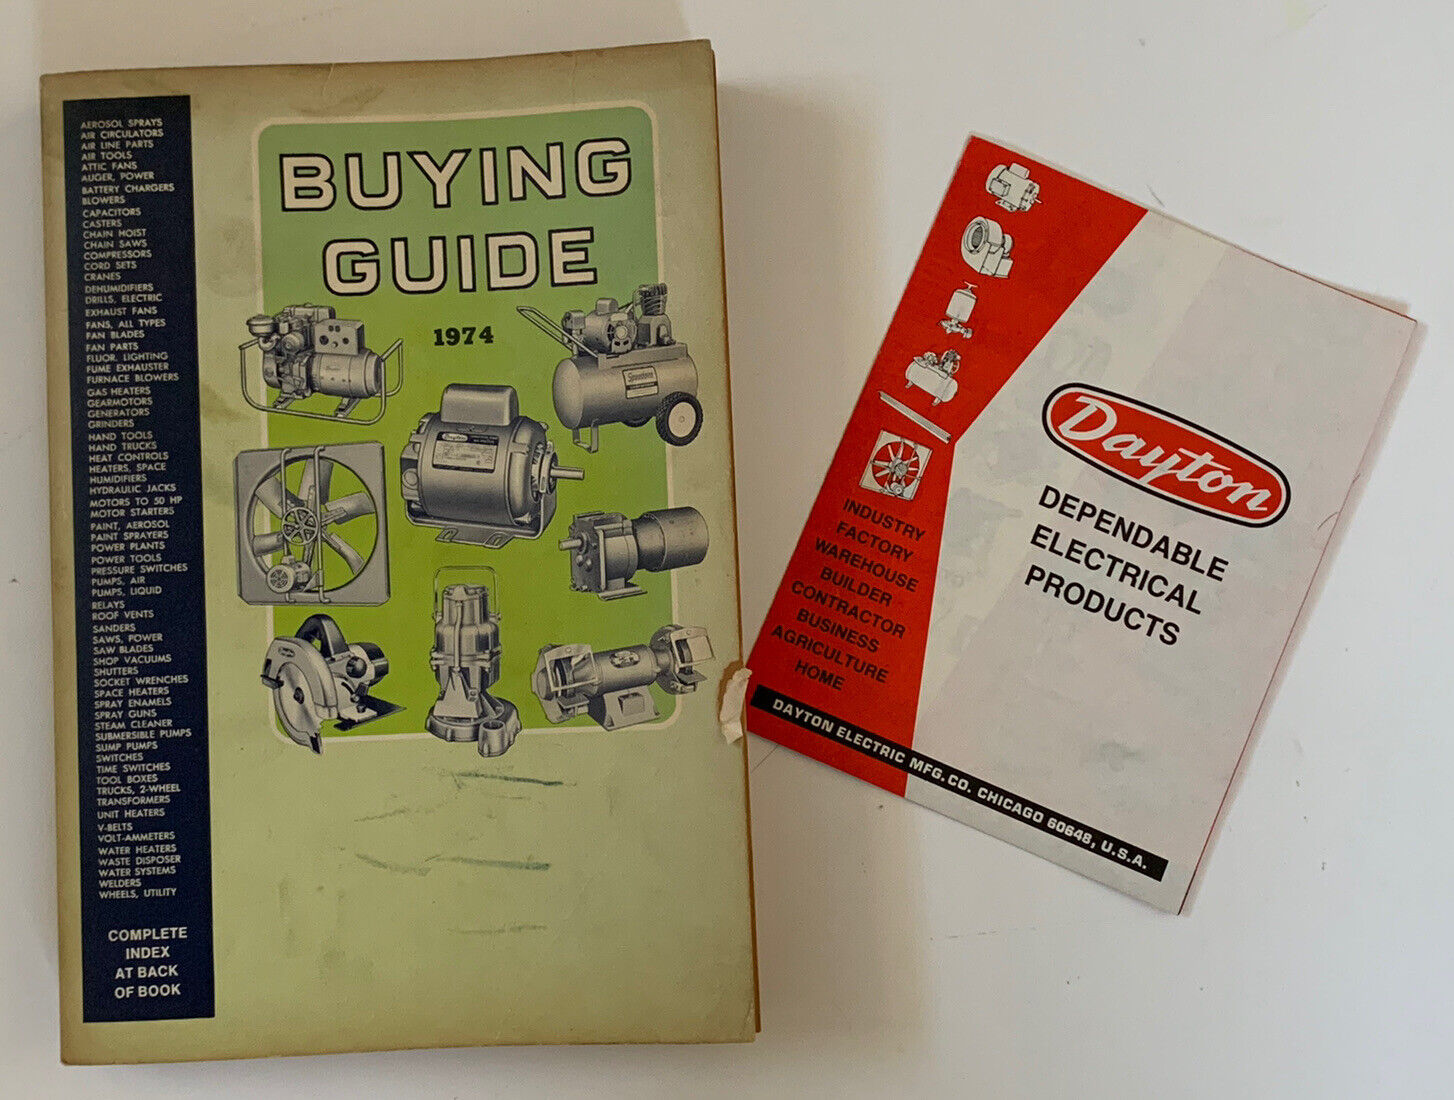 1974 Dayton Products Electrical Products Buying Guide Home Farm Industry VTG +